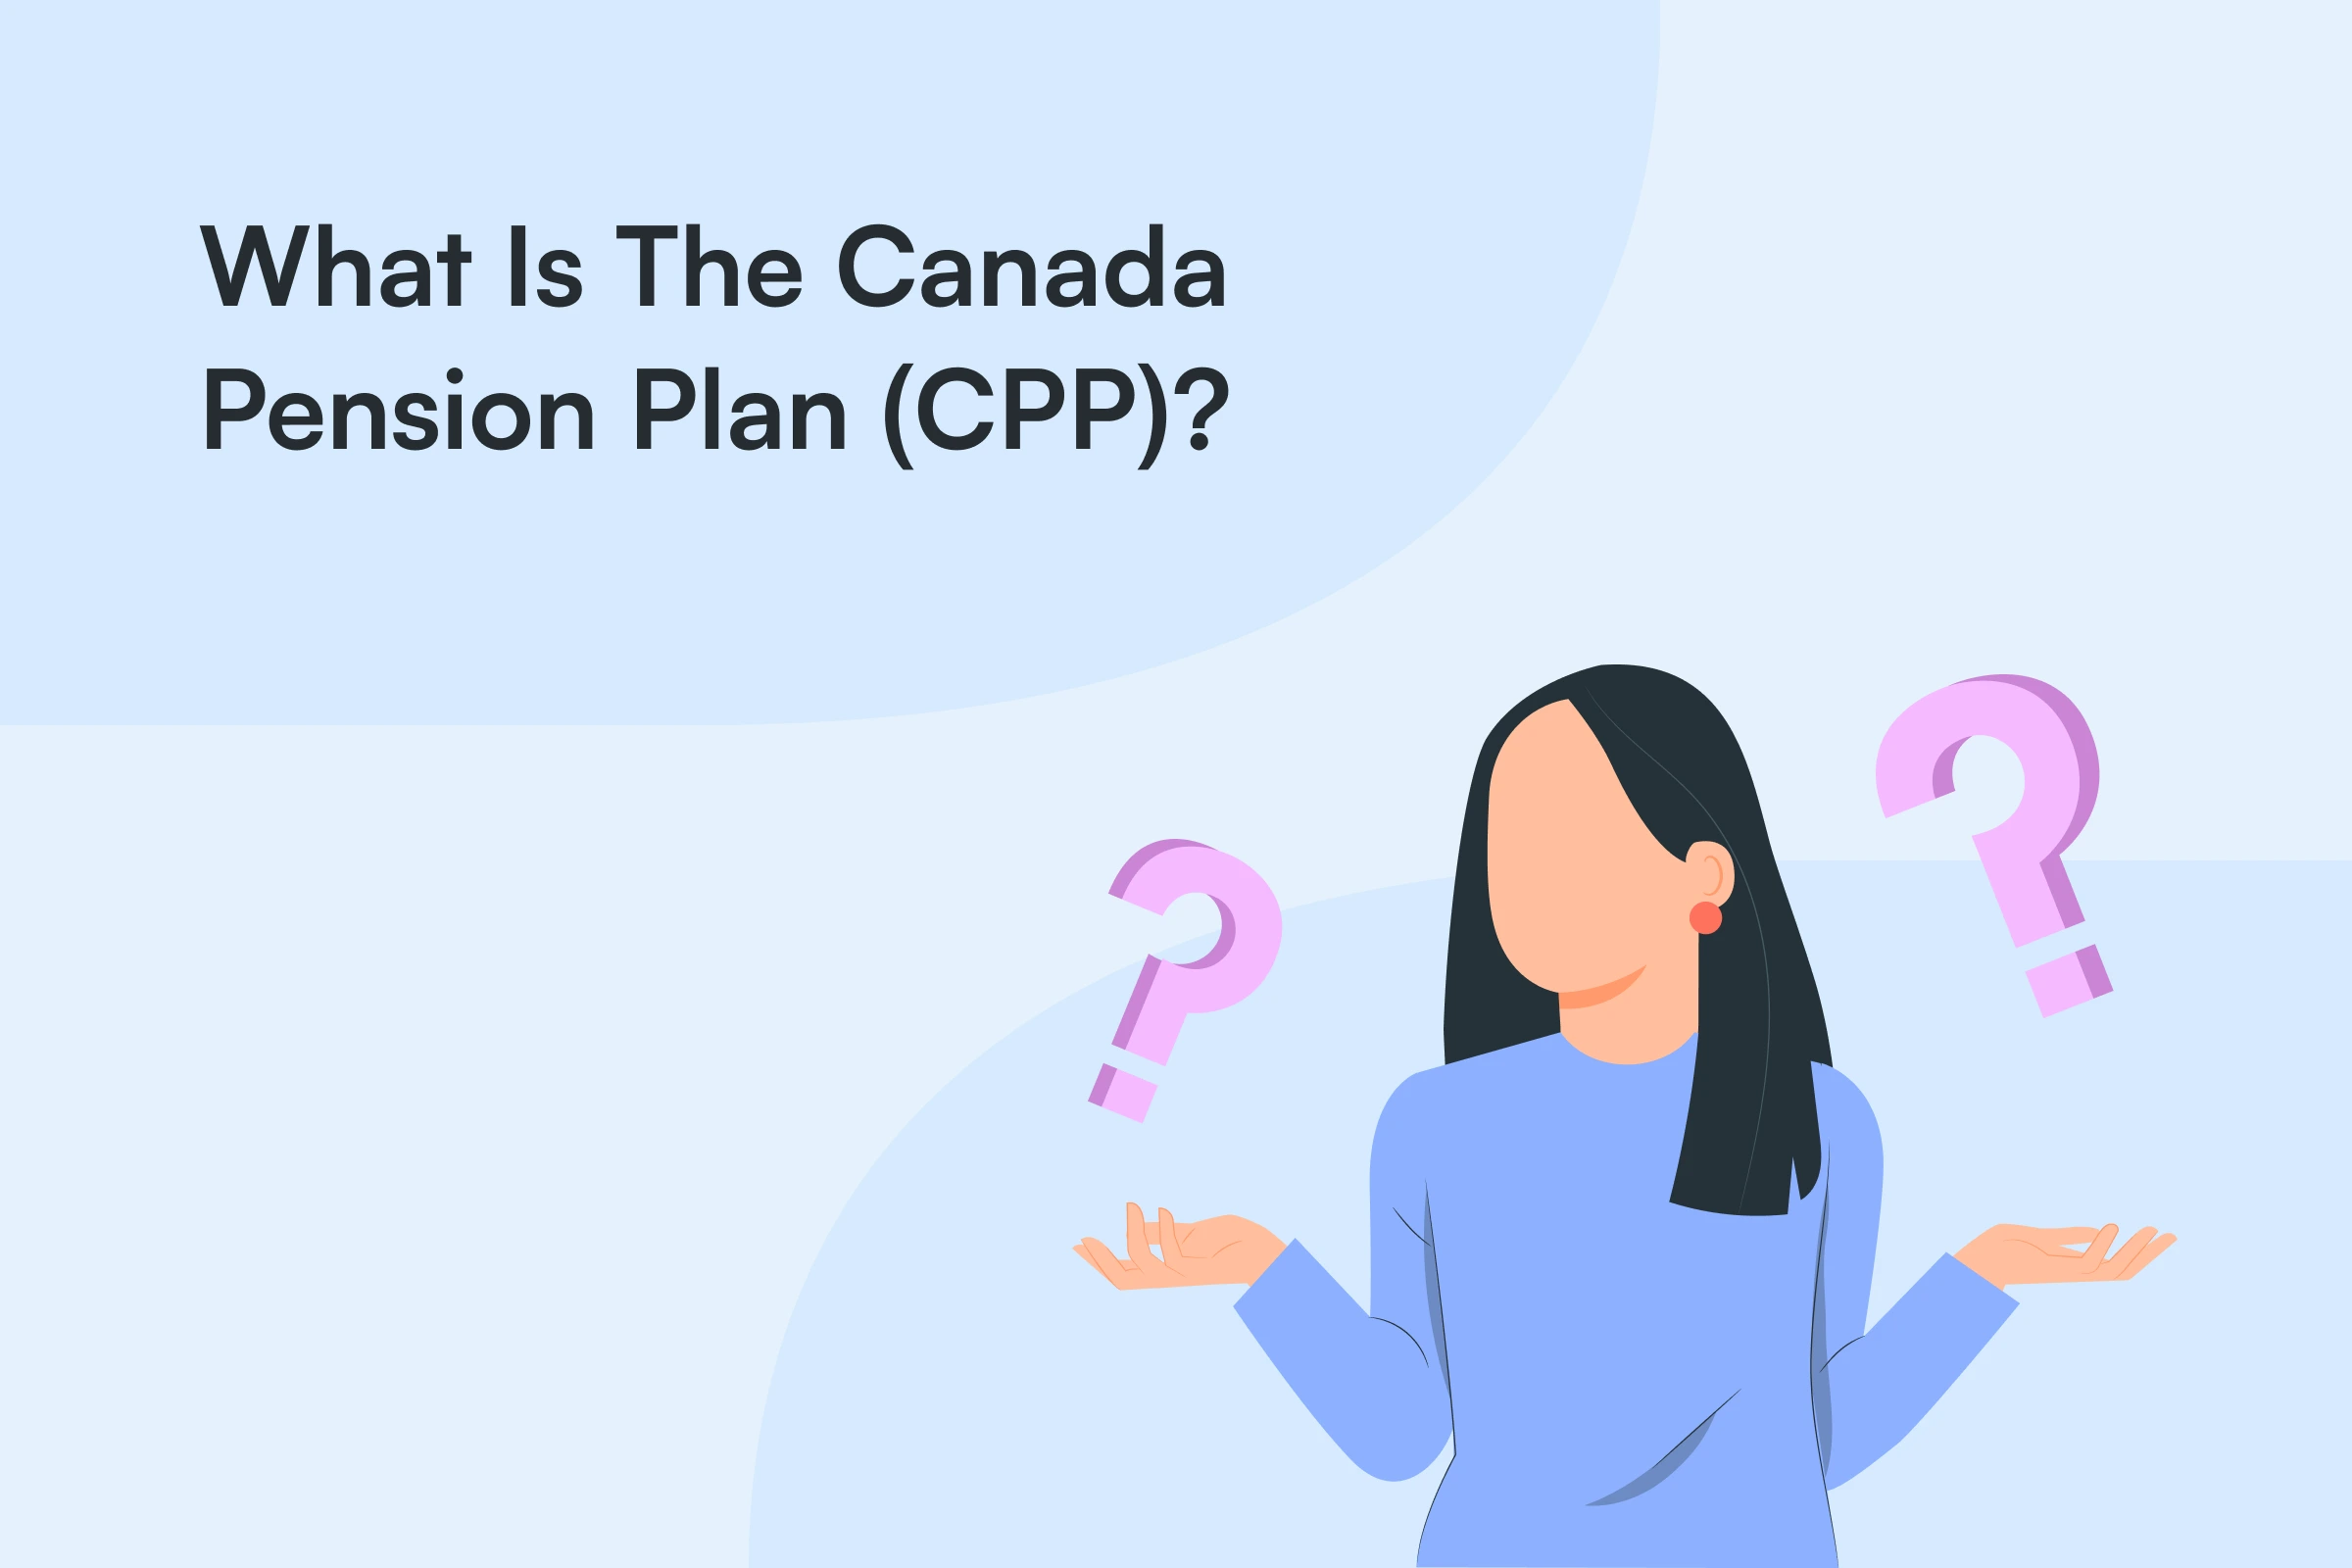 what is the Canada Pension Plan (CPP)?